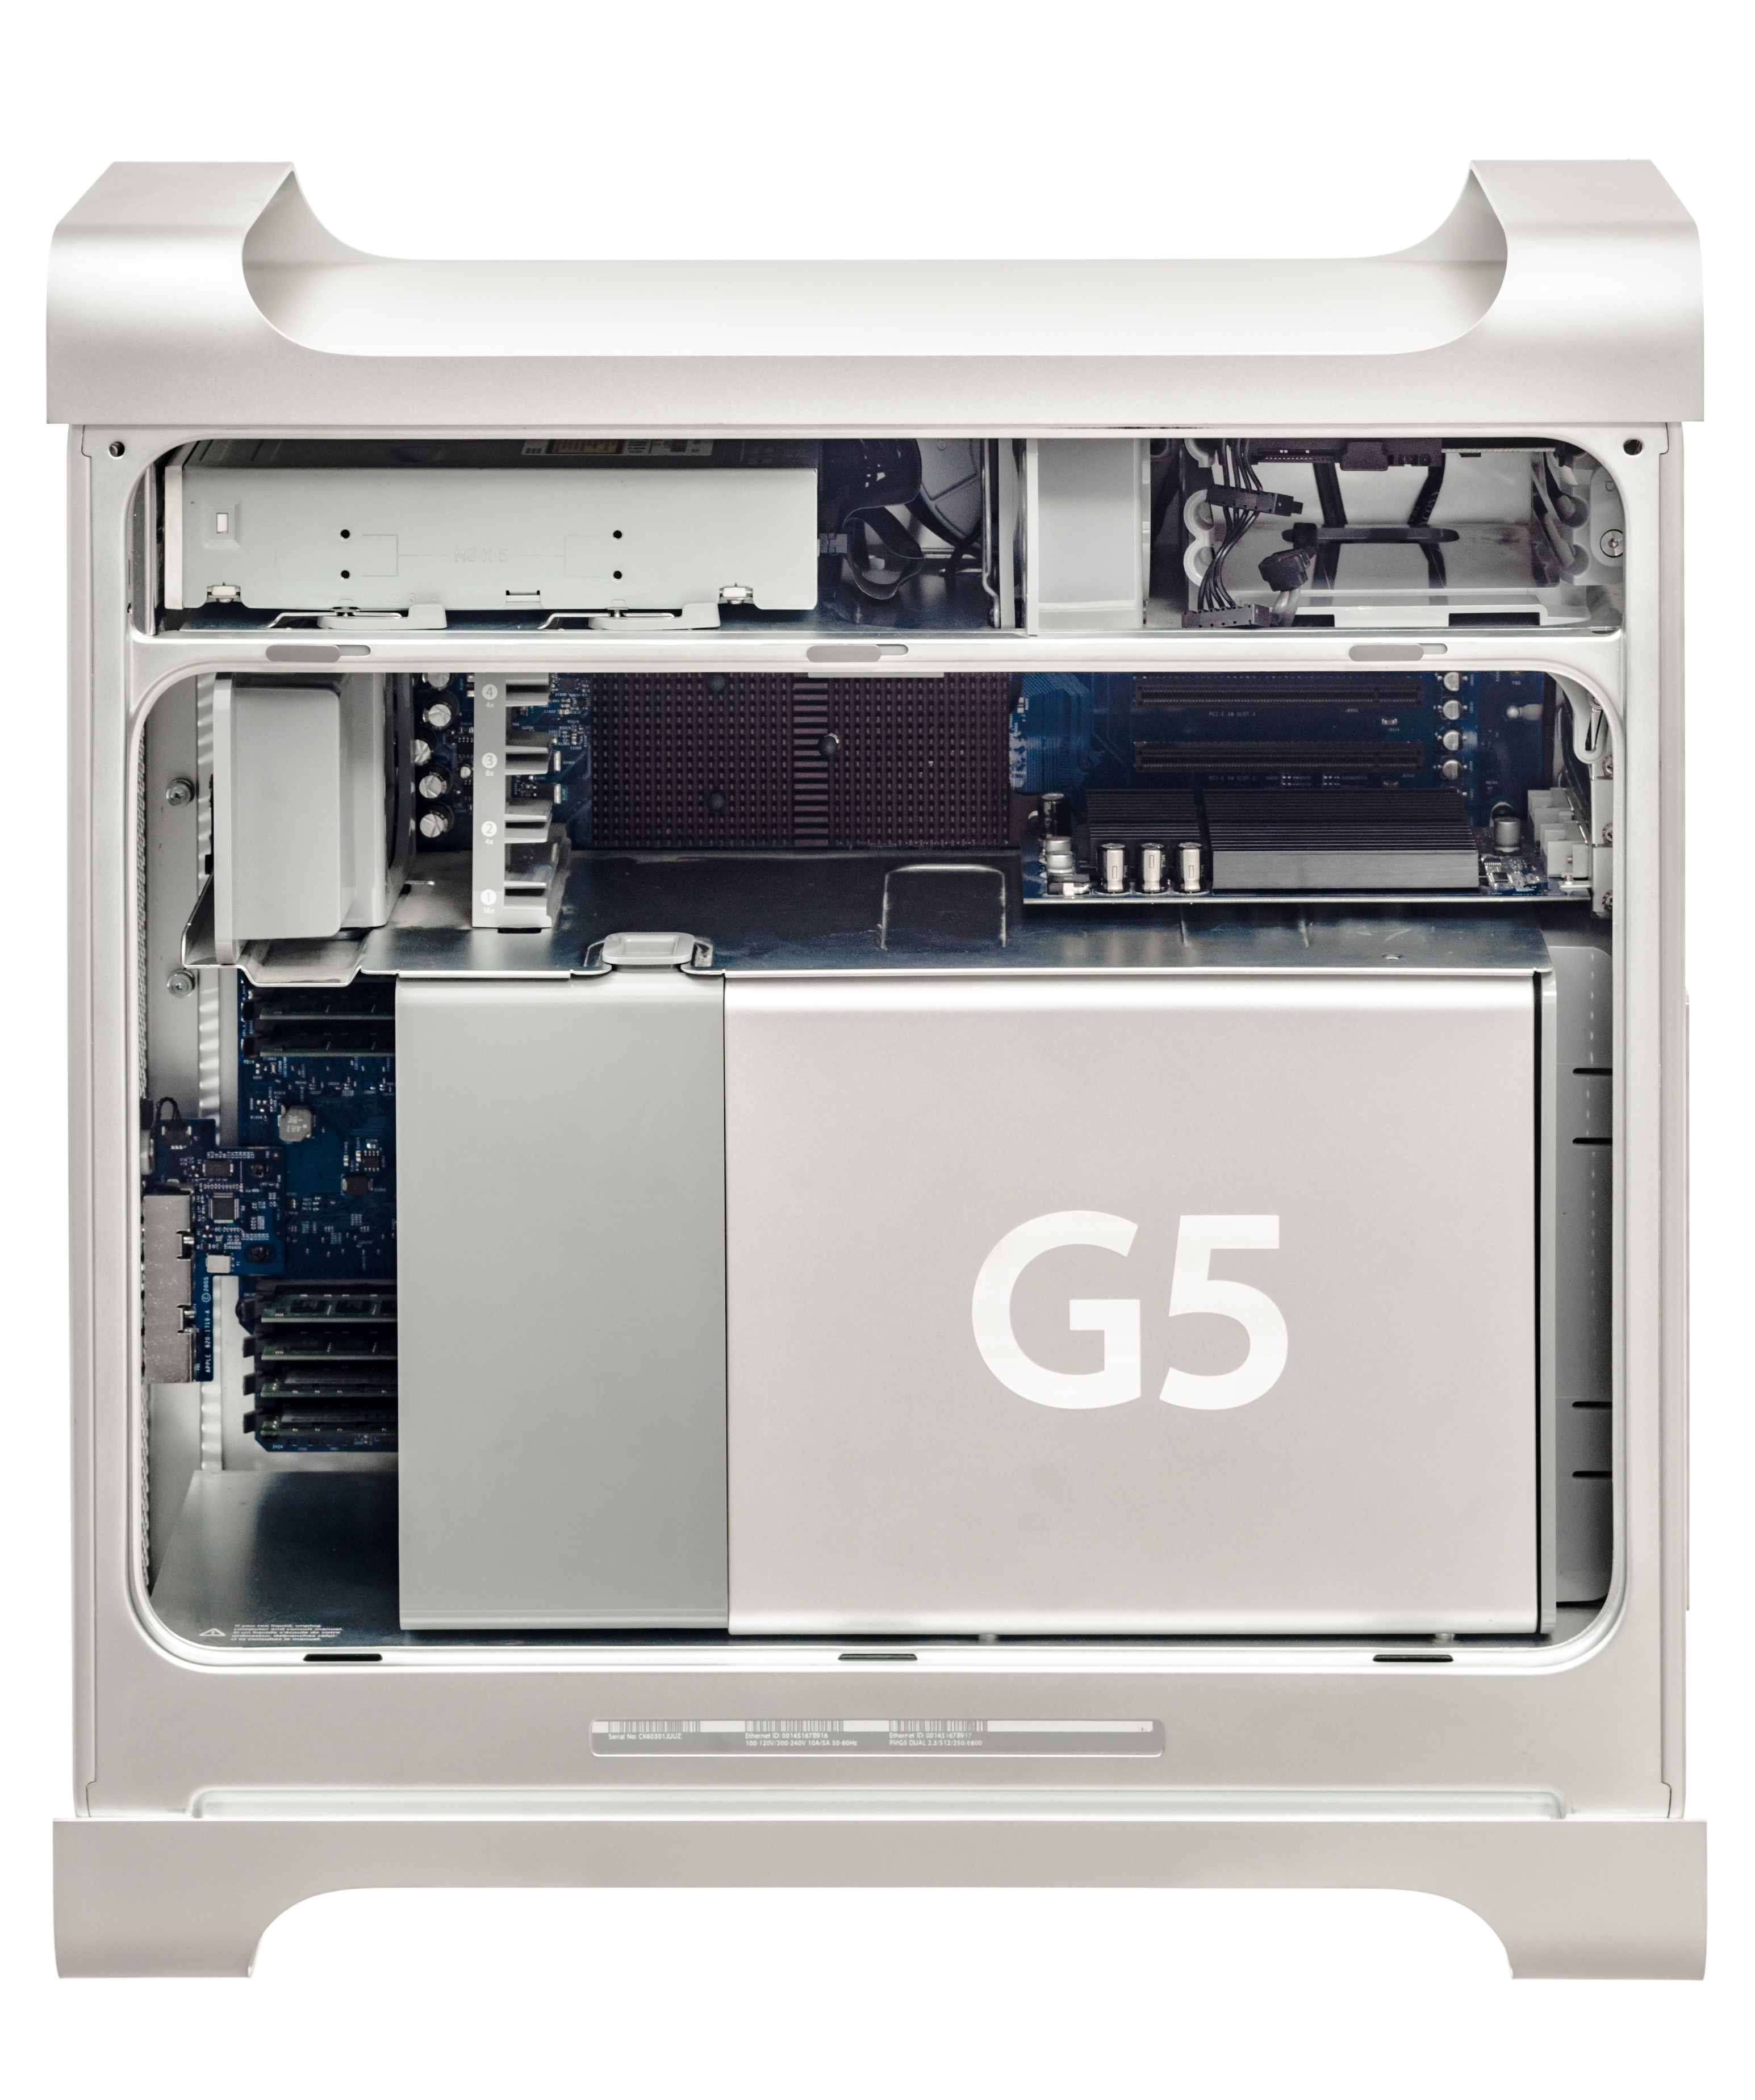 Mac os for power mac g5 download